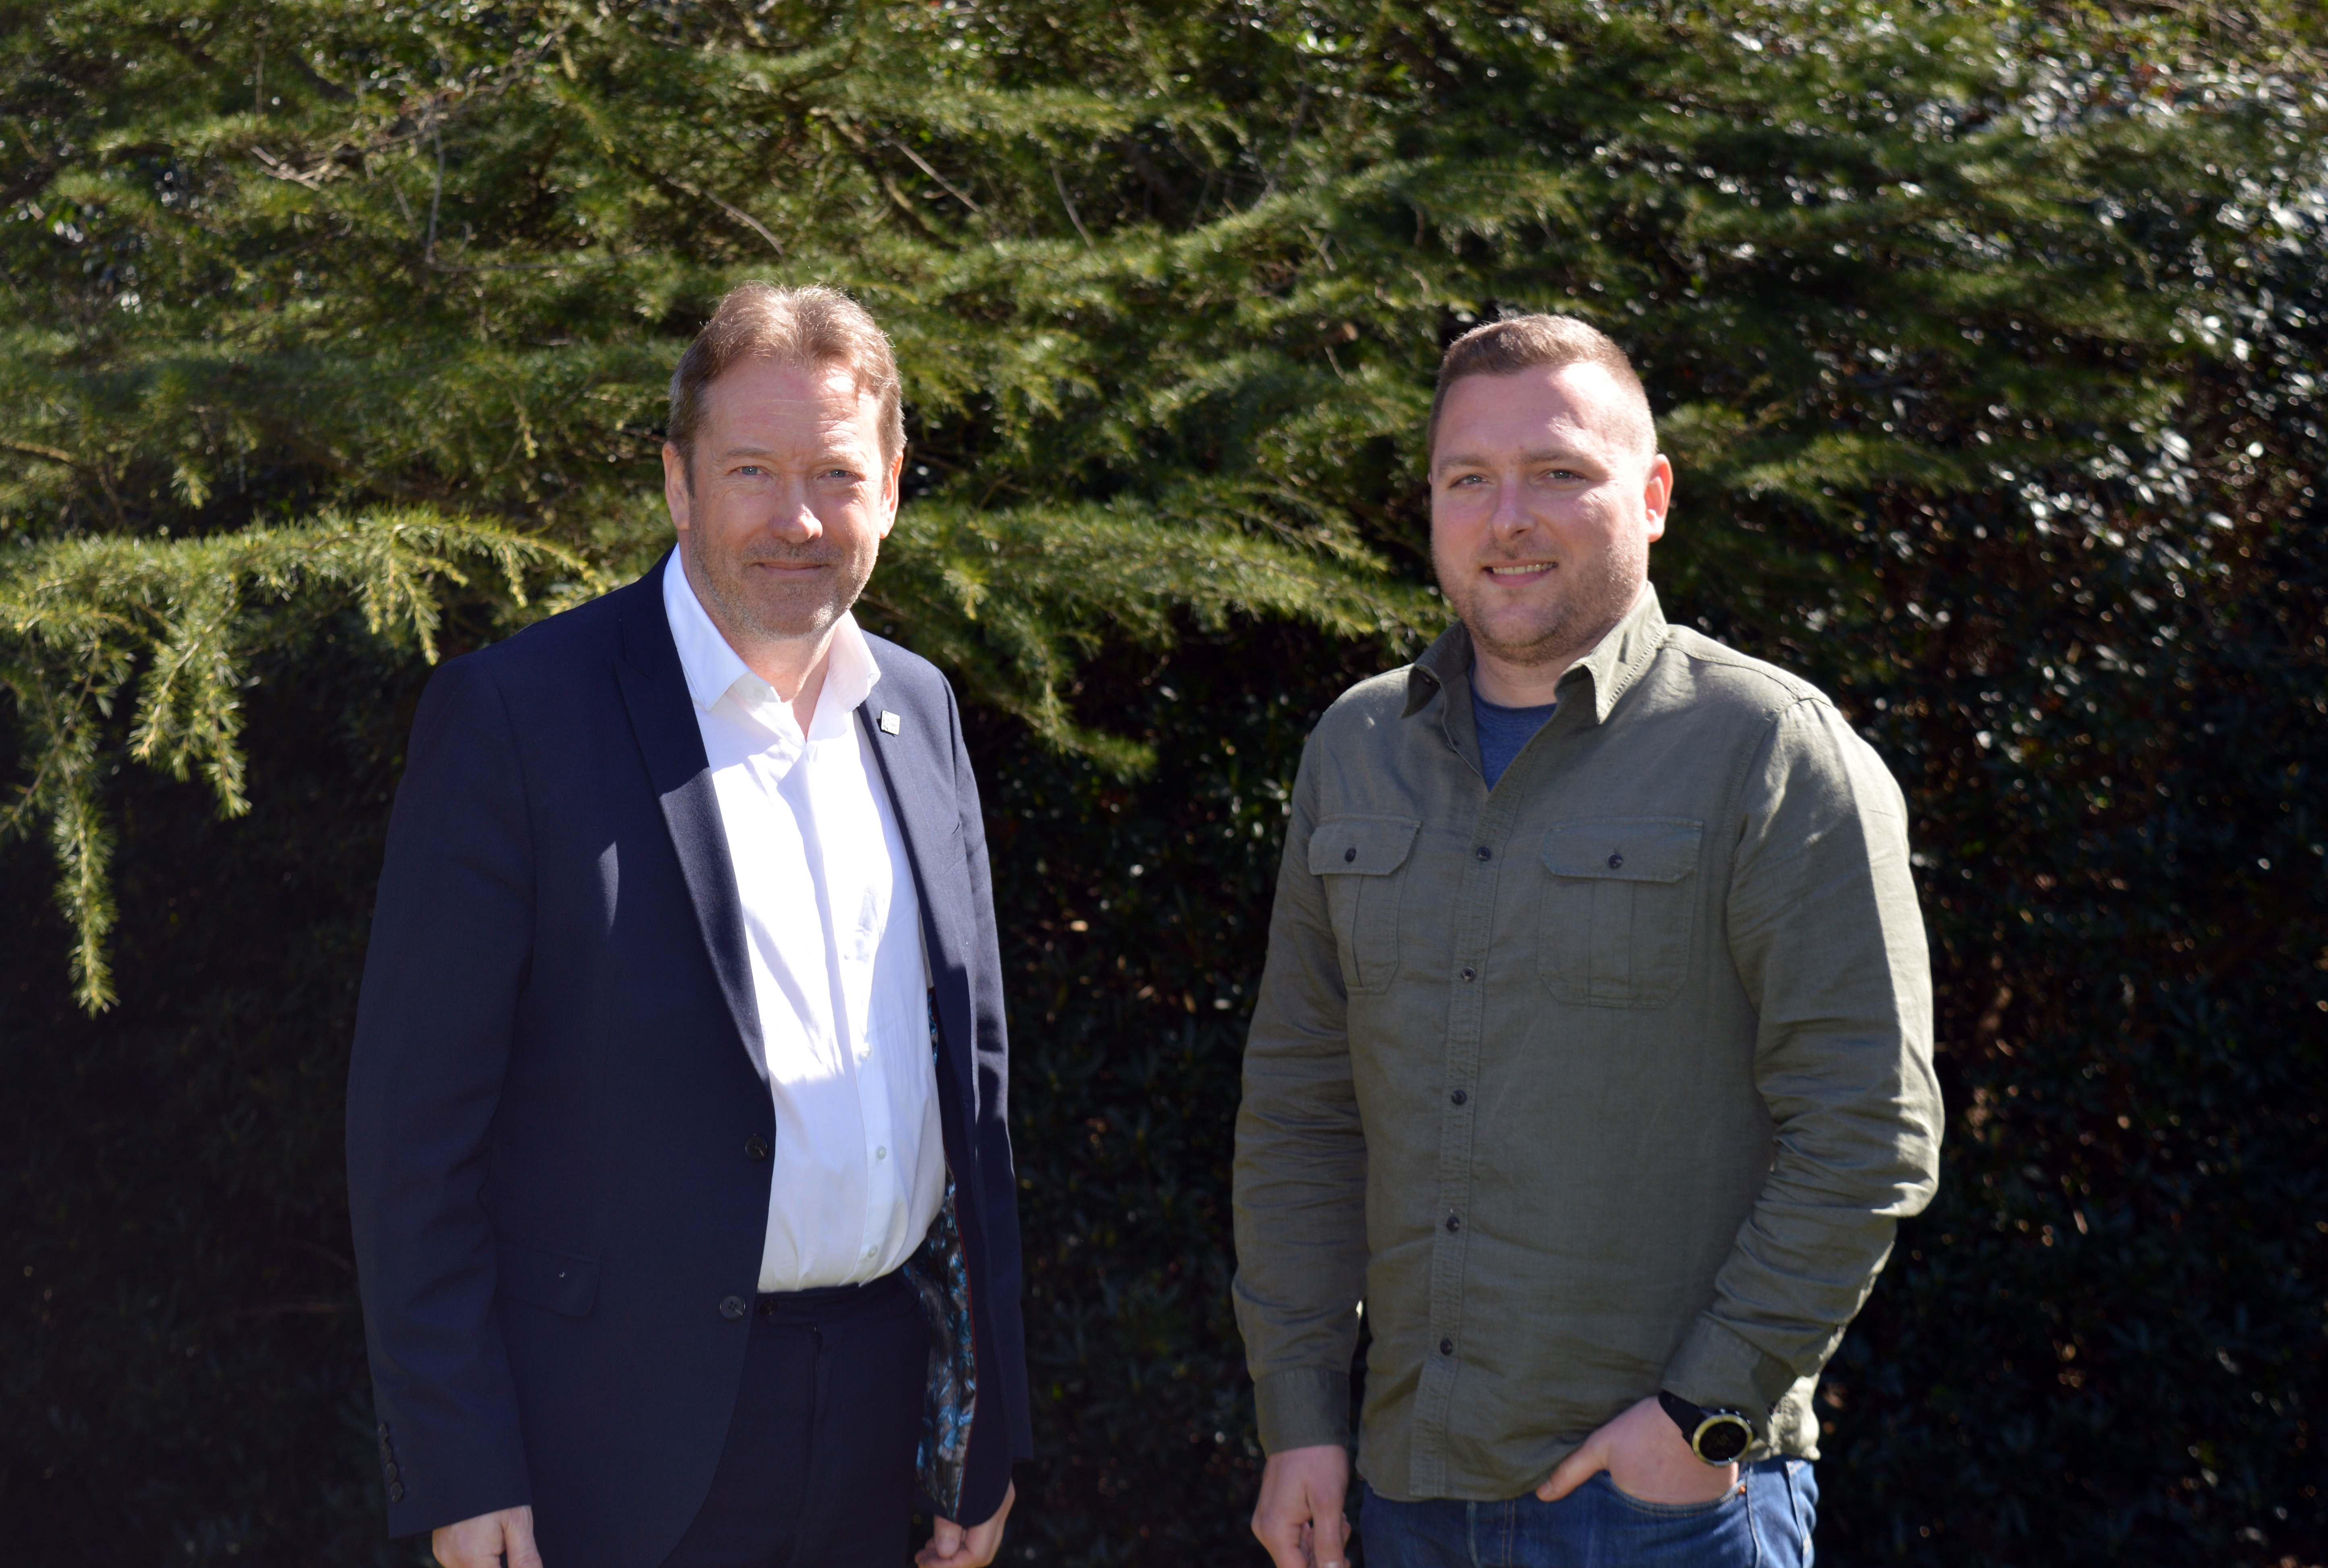 Image caption: L-R, Colin Campbell, Chief Executive, and Stefan Jindra, Sustainability Coordinator, The James Hutton Institute. 